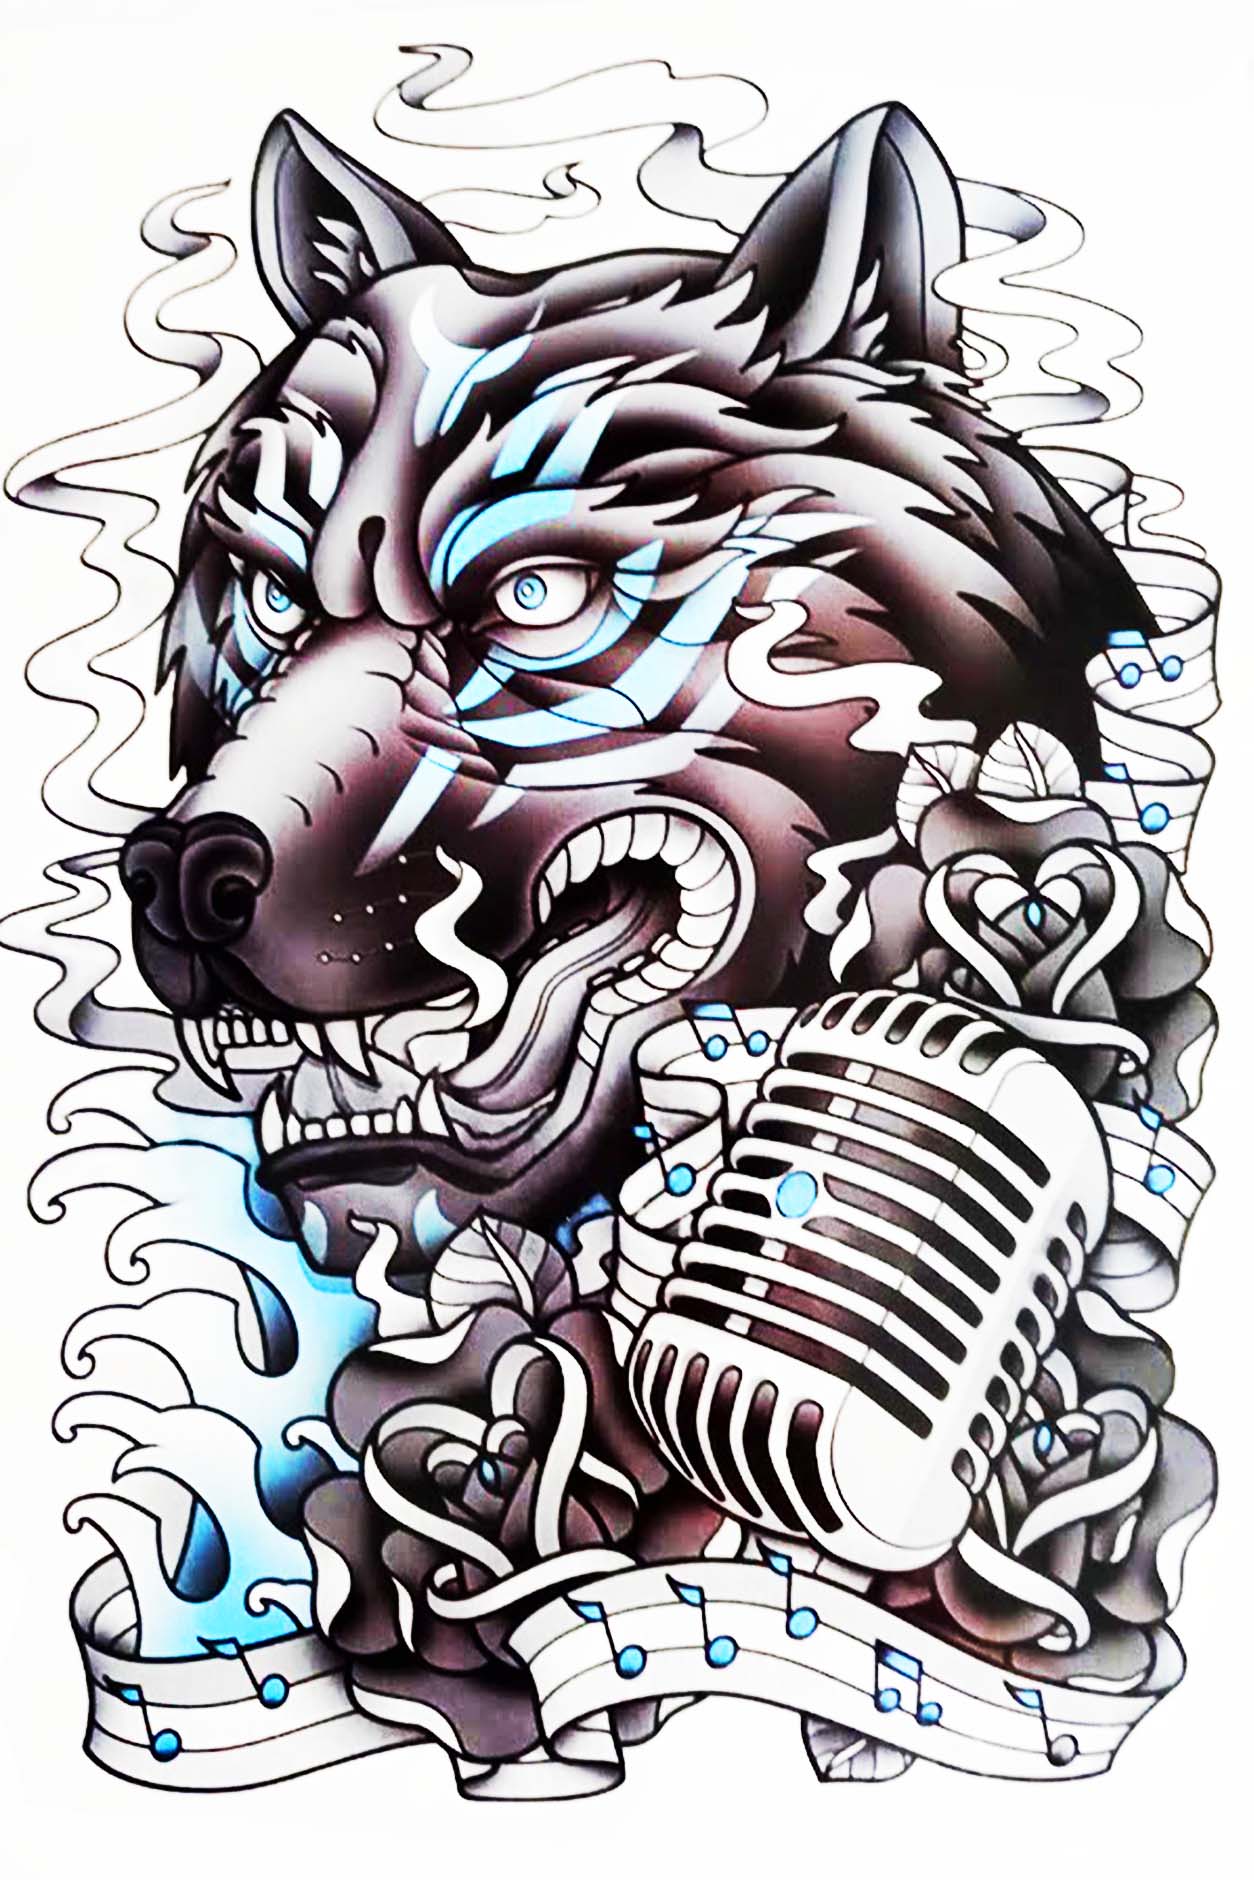 A black wolf has countless blues bellowing out of him. A vintage classic microphone and flowing notes fill the background bringing this wolf alive with musical motion. This full-back tattoo is a nod to the smokin’ blues days of Muddy Waters, Howlin Wolf, and many notable music legends of the 1950s and 1960s.